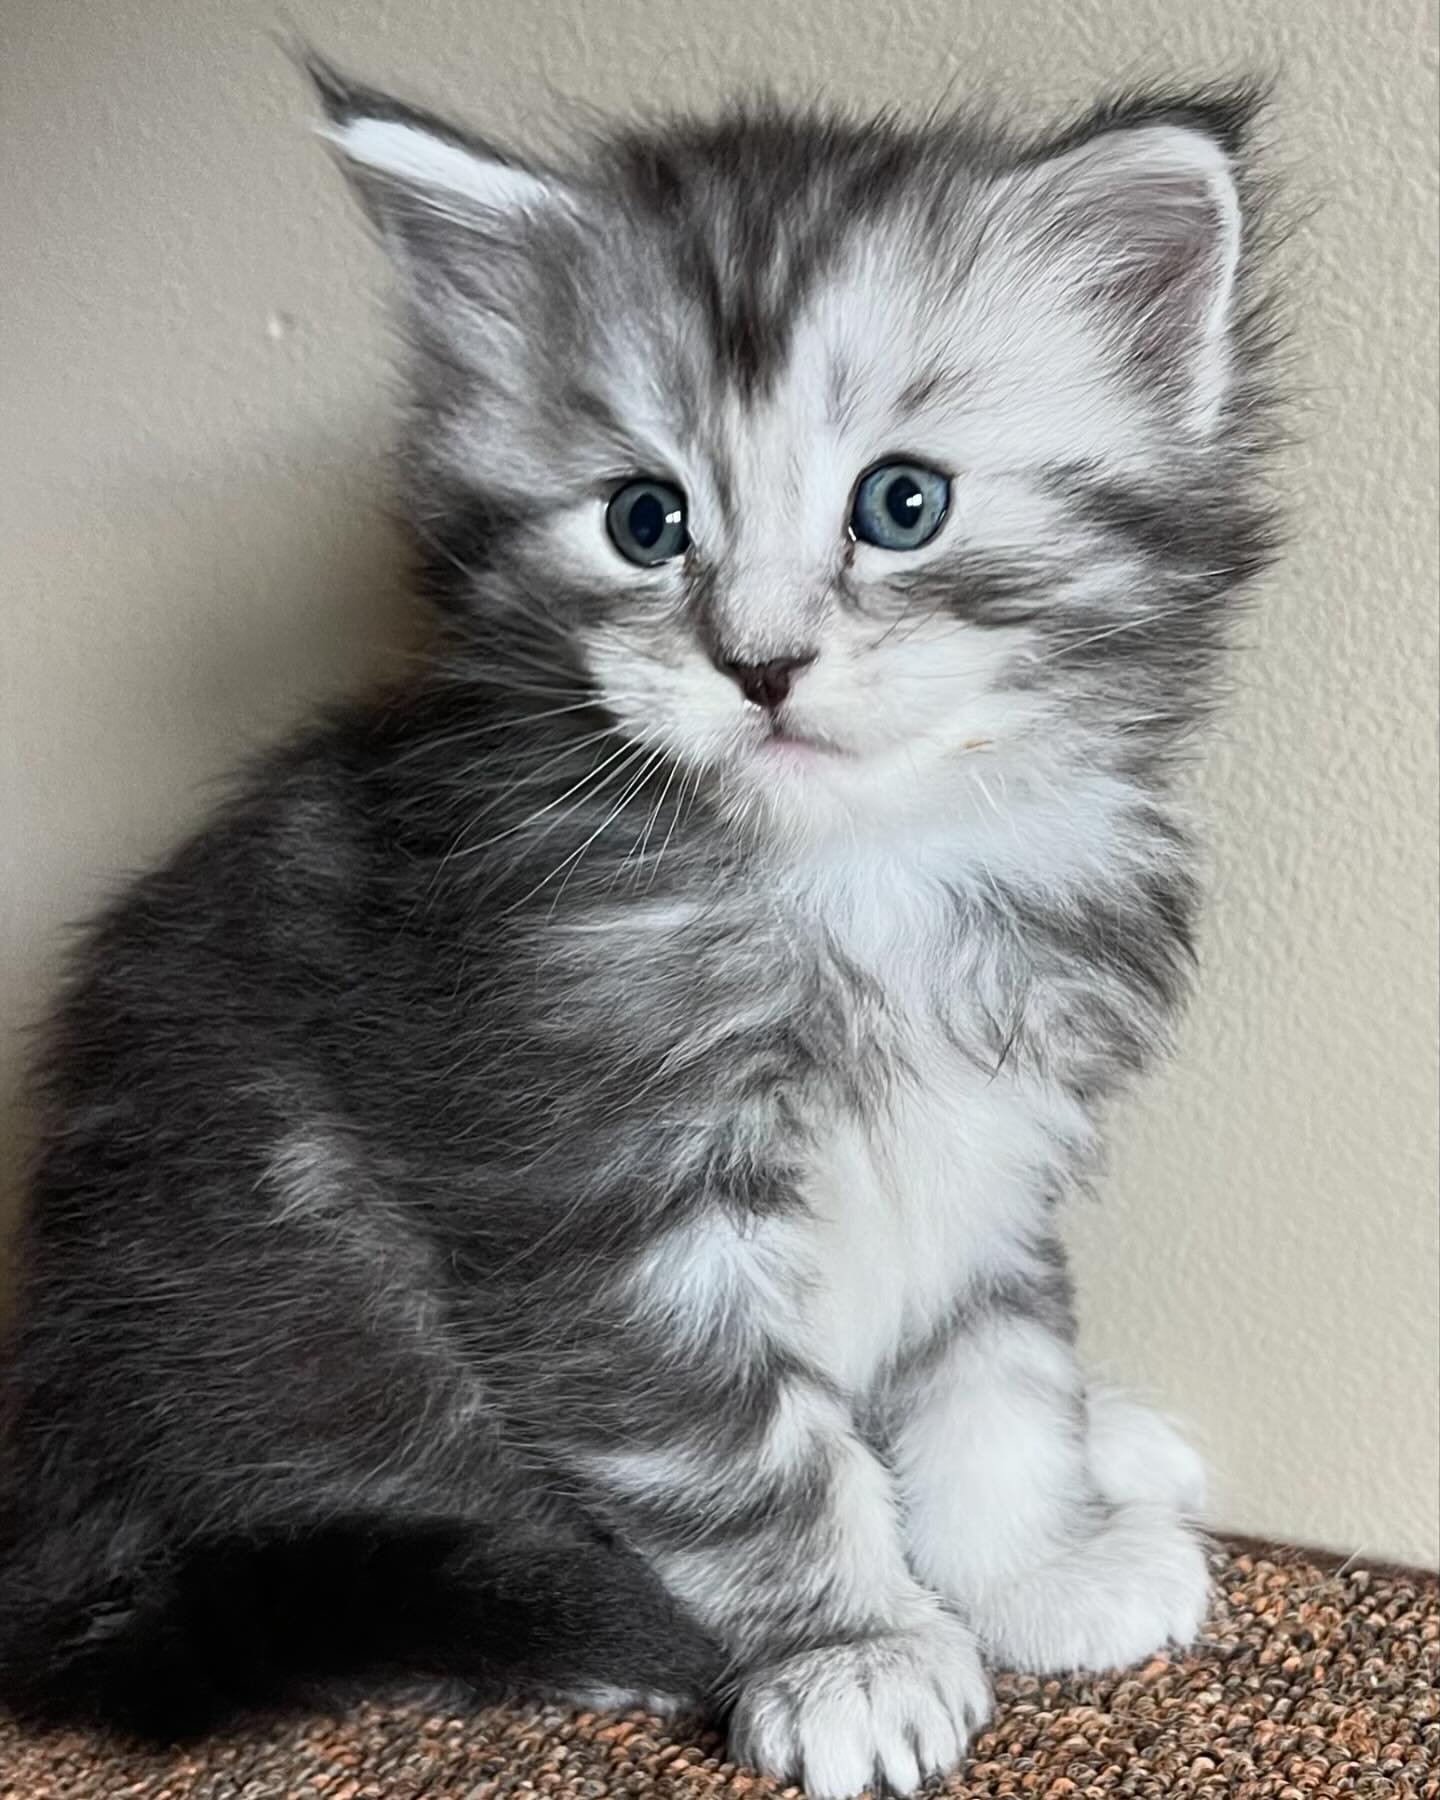 ✨FEATURED KITTEN✨
High Country Maine Coons &ldquo;Ragnar&rdquo;
Silver classic tabby ~ Male
&bull;
Looking for a fur buddy? Look no further! Ragnar is looking for his FURever home!
&bull; 
LINK IN BIO TO INQUIRE!

#mainecoon #mainecoons #mainecooncat